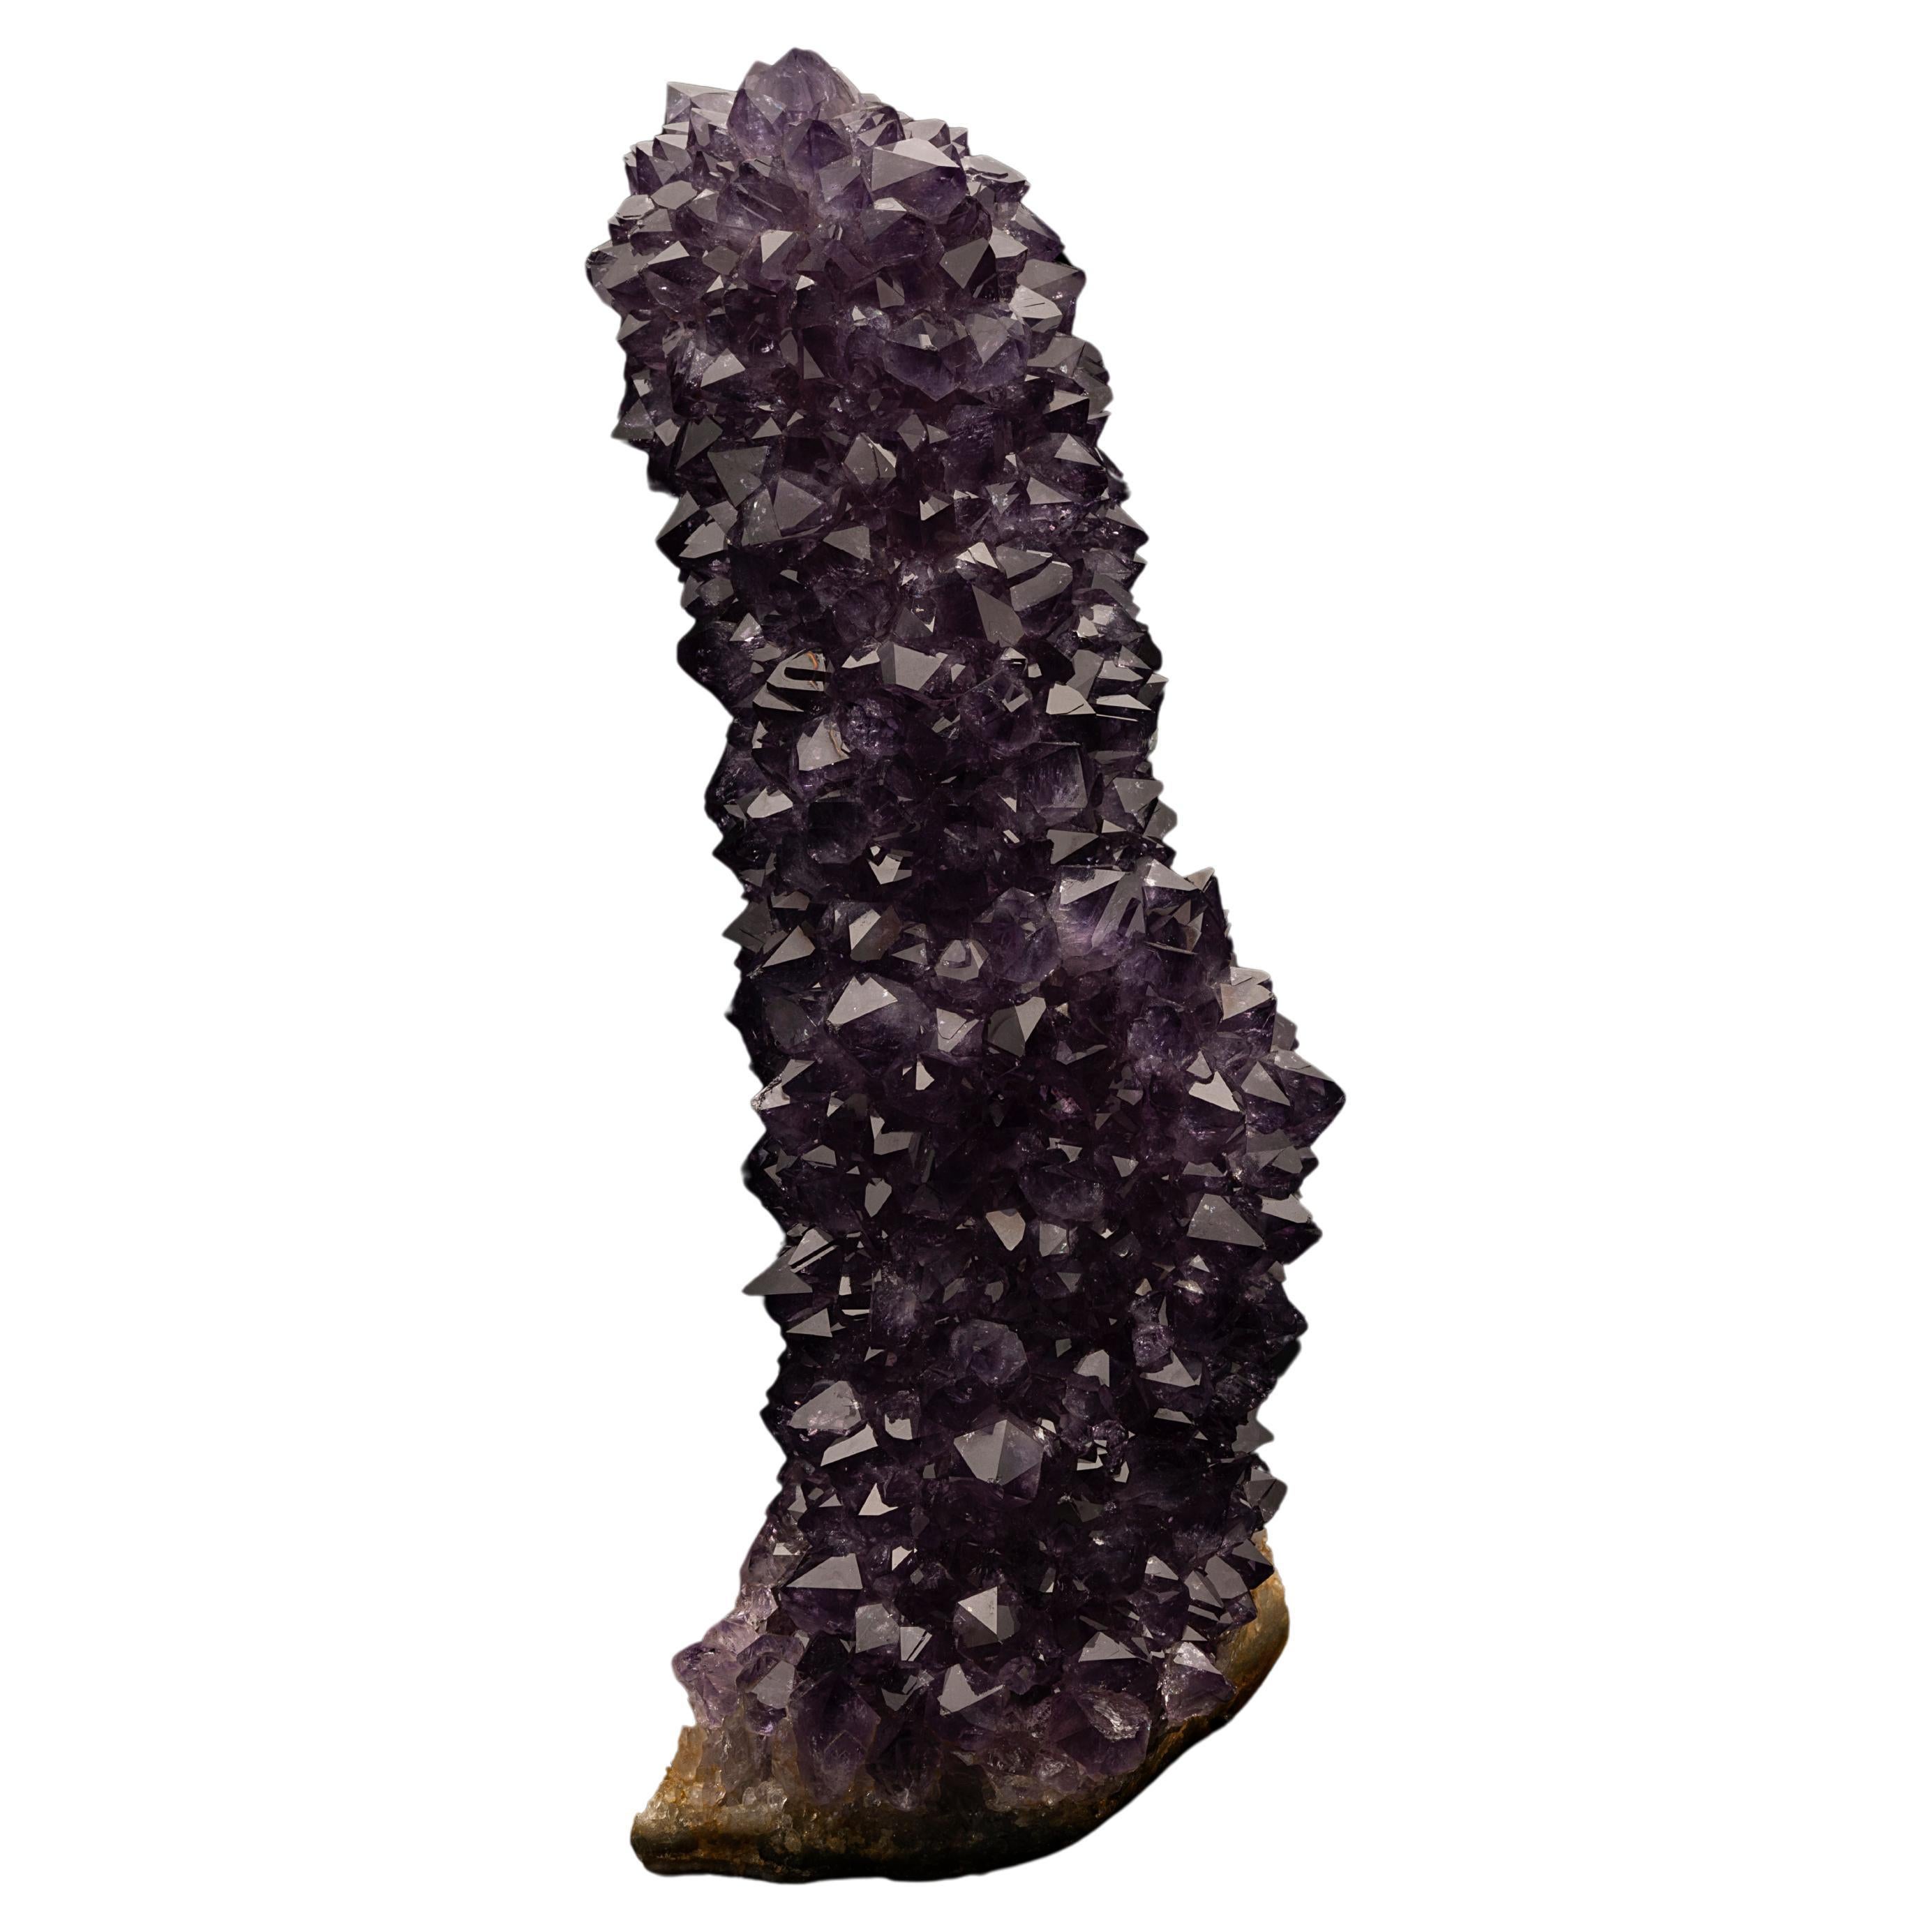 This glimmering Uruguayan amethyst stalactite features purple-drenched, perfectly terminated amethyst crystals. These amethyst stalactites are only known to grow inside geodes found in Uruguay. This specimen is uniquely perfect, with no dings and no